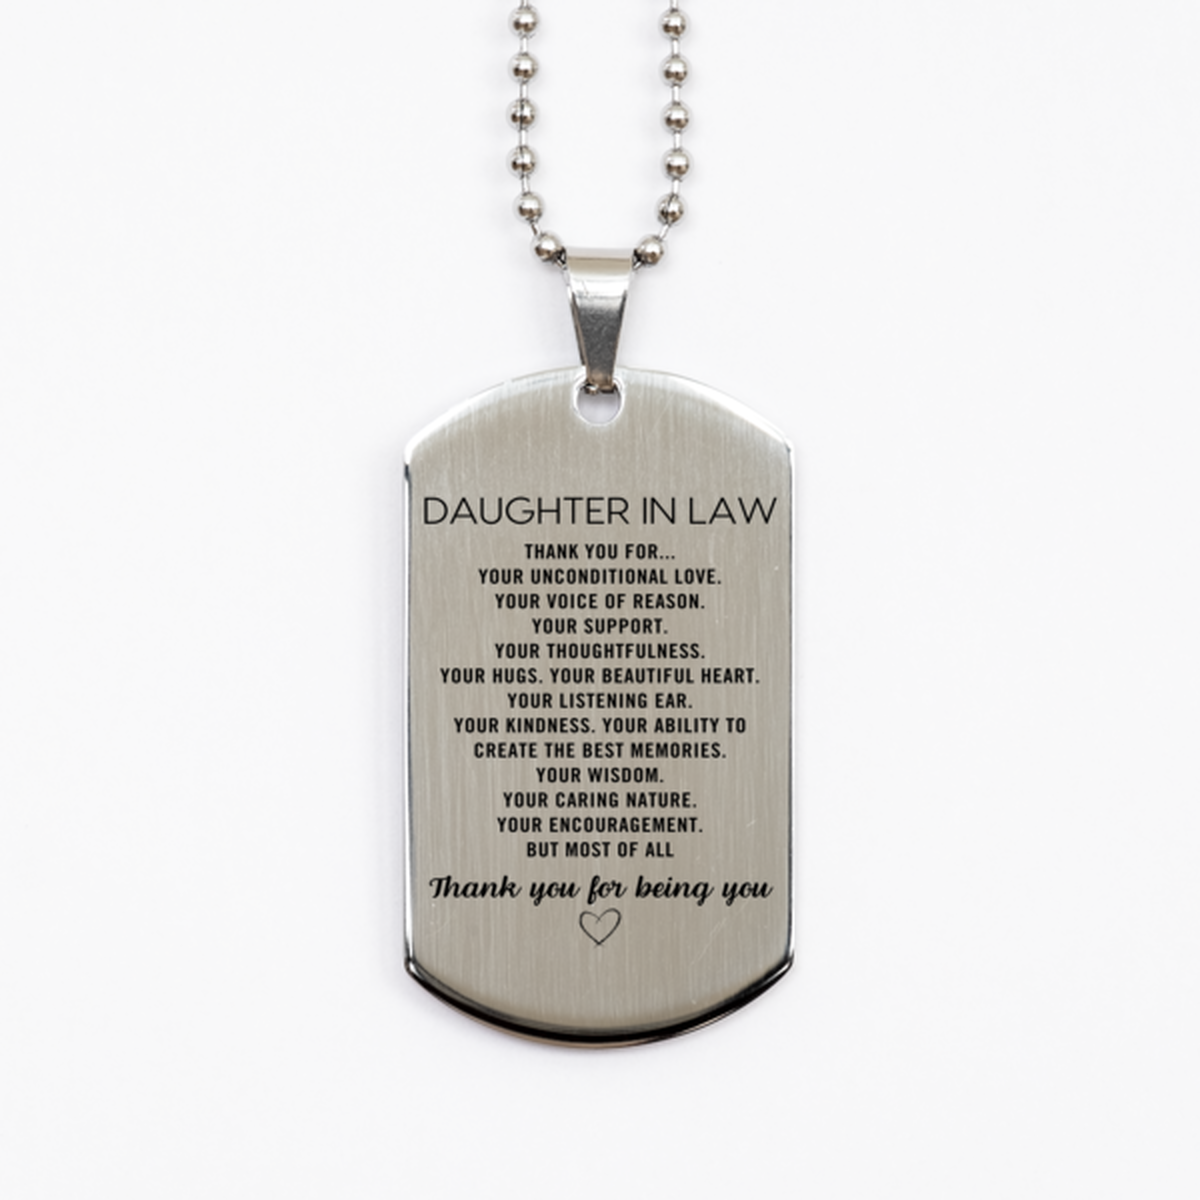 Daughter In Law Silver Dog Tag Custom, Engraved Gifts For Daughter In Law Christmas Graduation Birthday Gifts for Men Women Daughter In Law Thank you for Your unconditional love